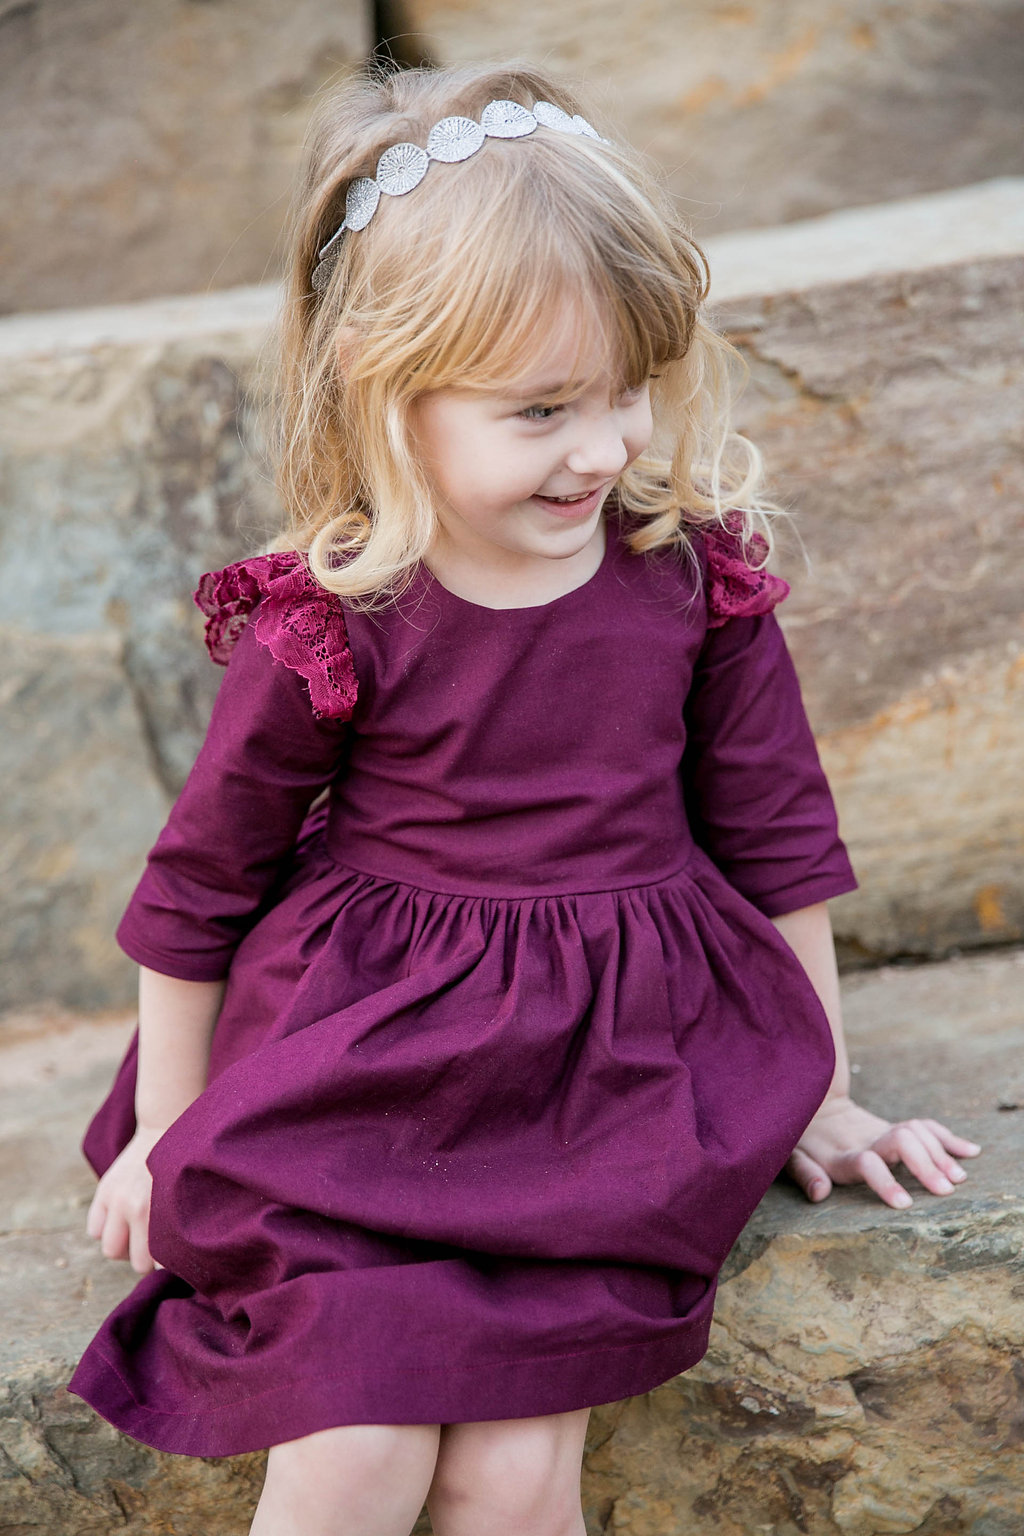 lace maroon dress for girls // custom made girls clothing from cuteheads. design your own at cuteheads.com